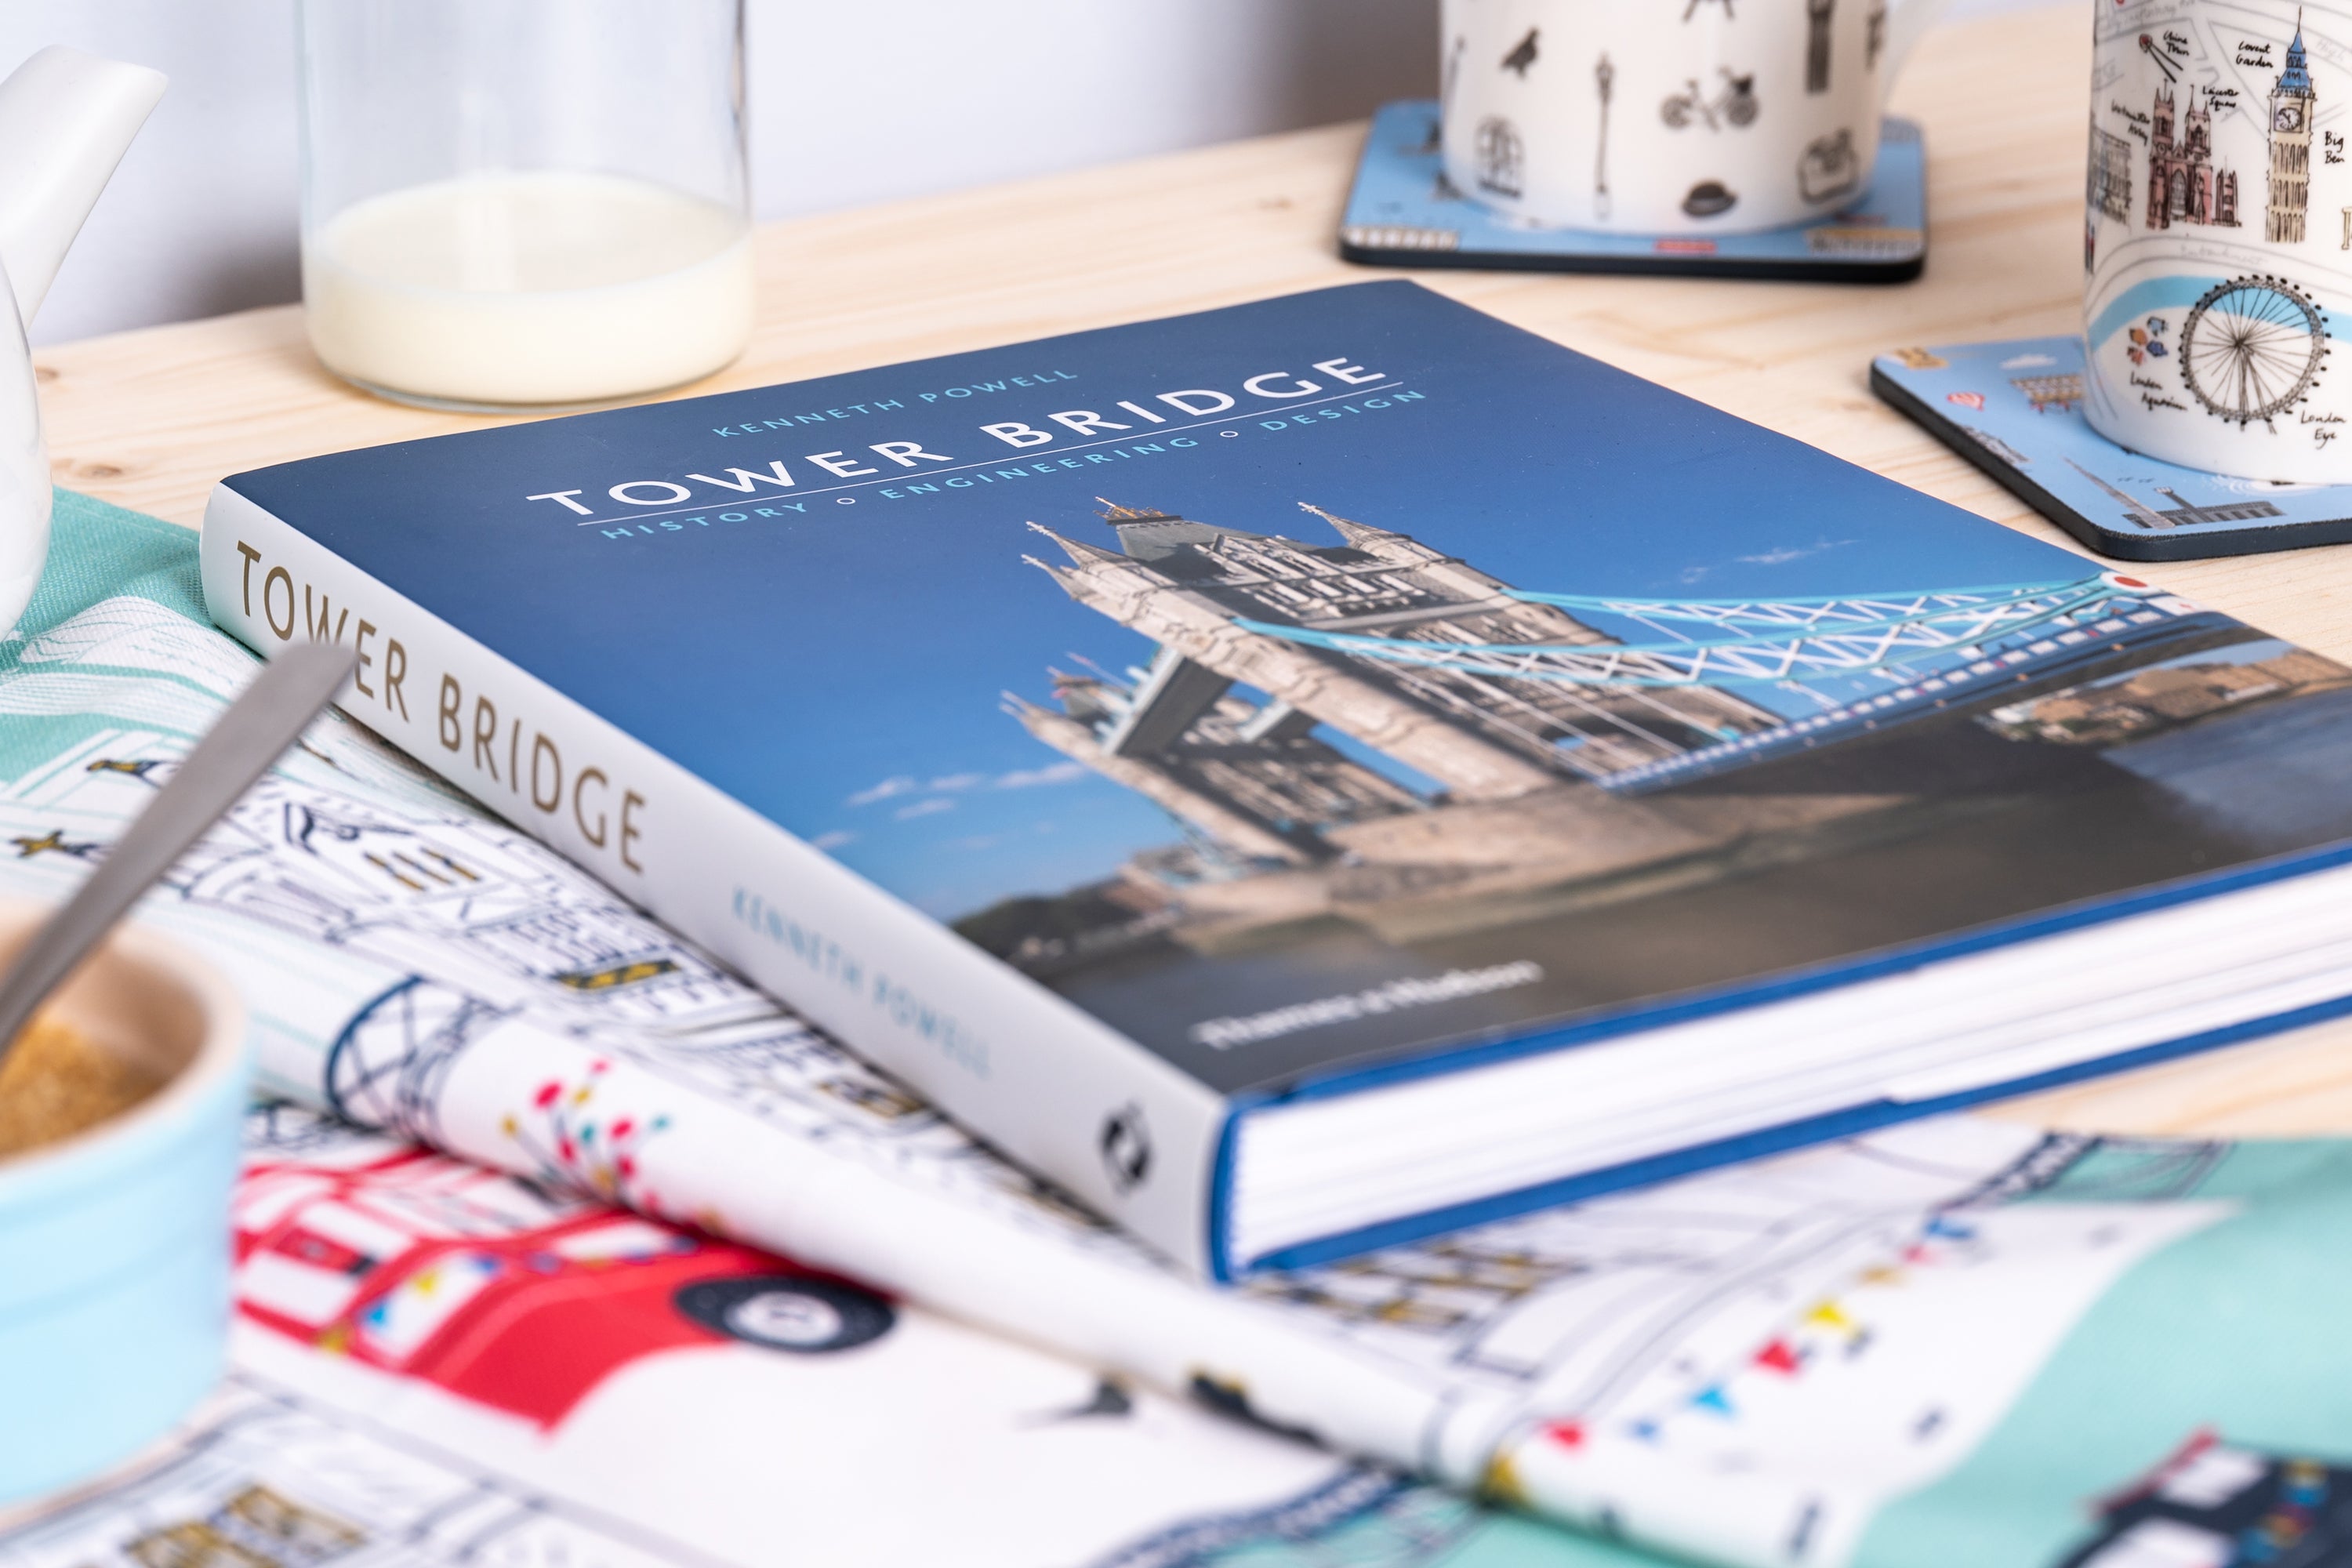 The definitive hardcover book on Tower Bridge is available from our Summer Sale